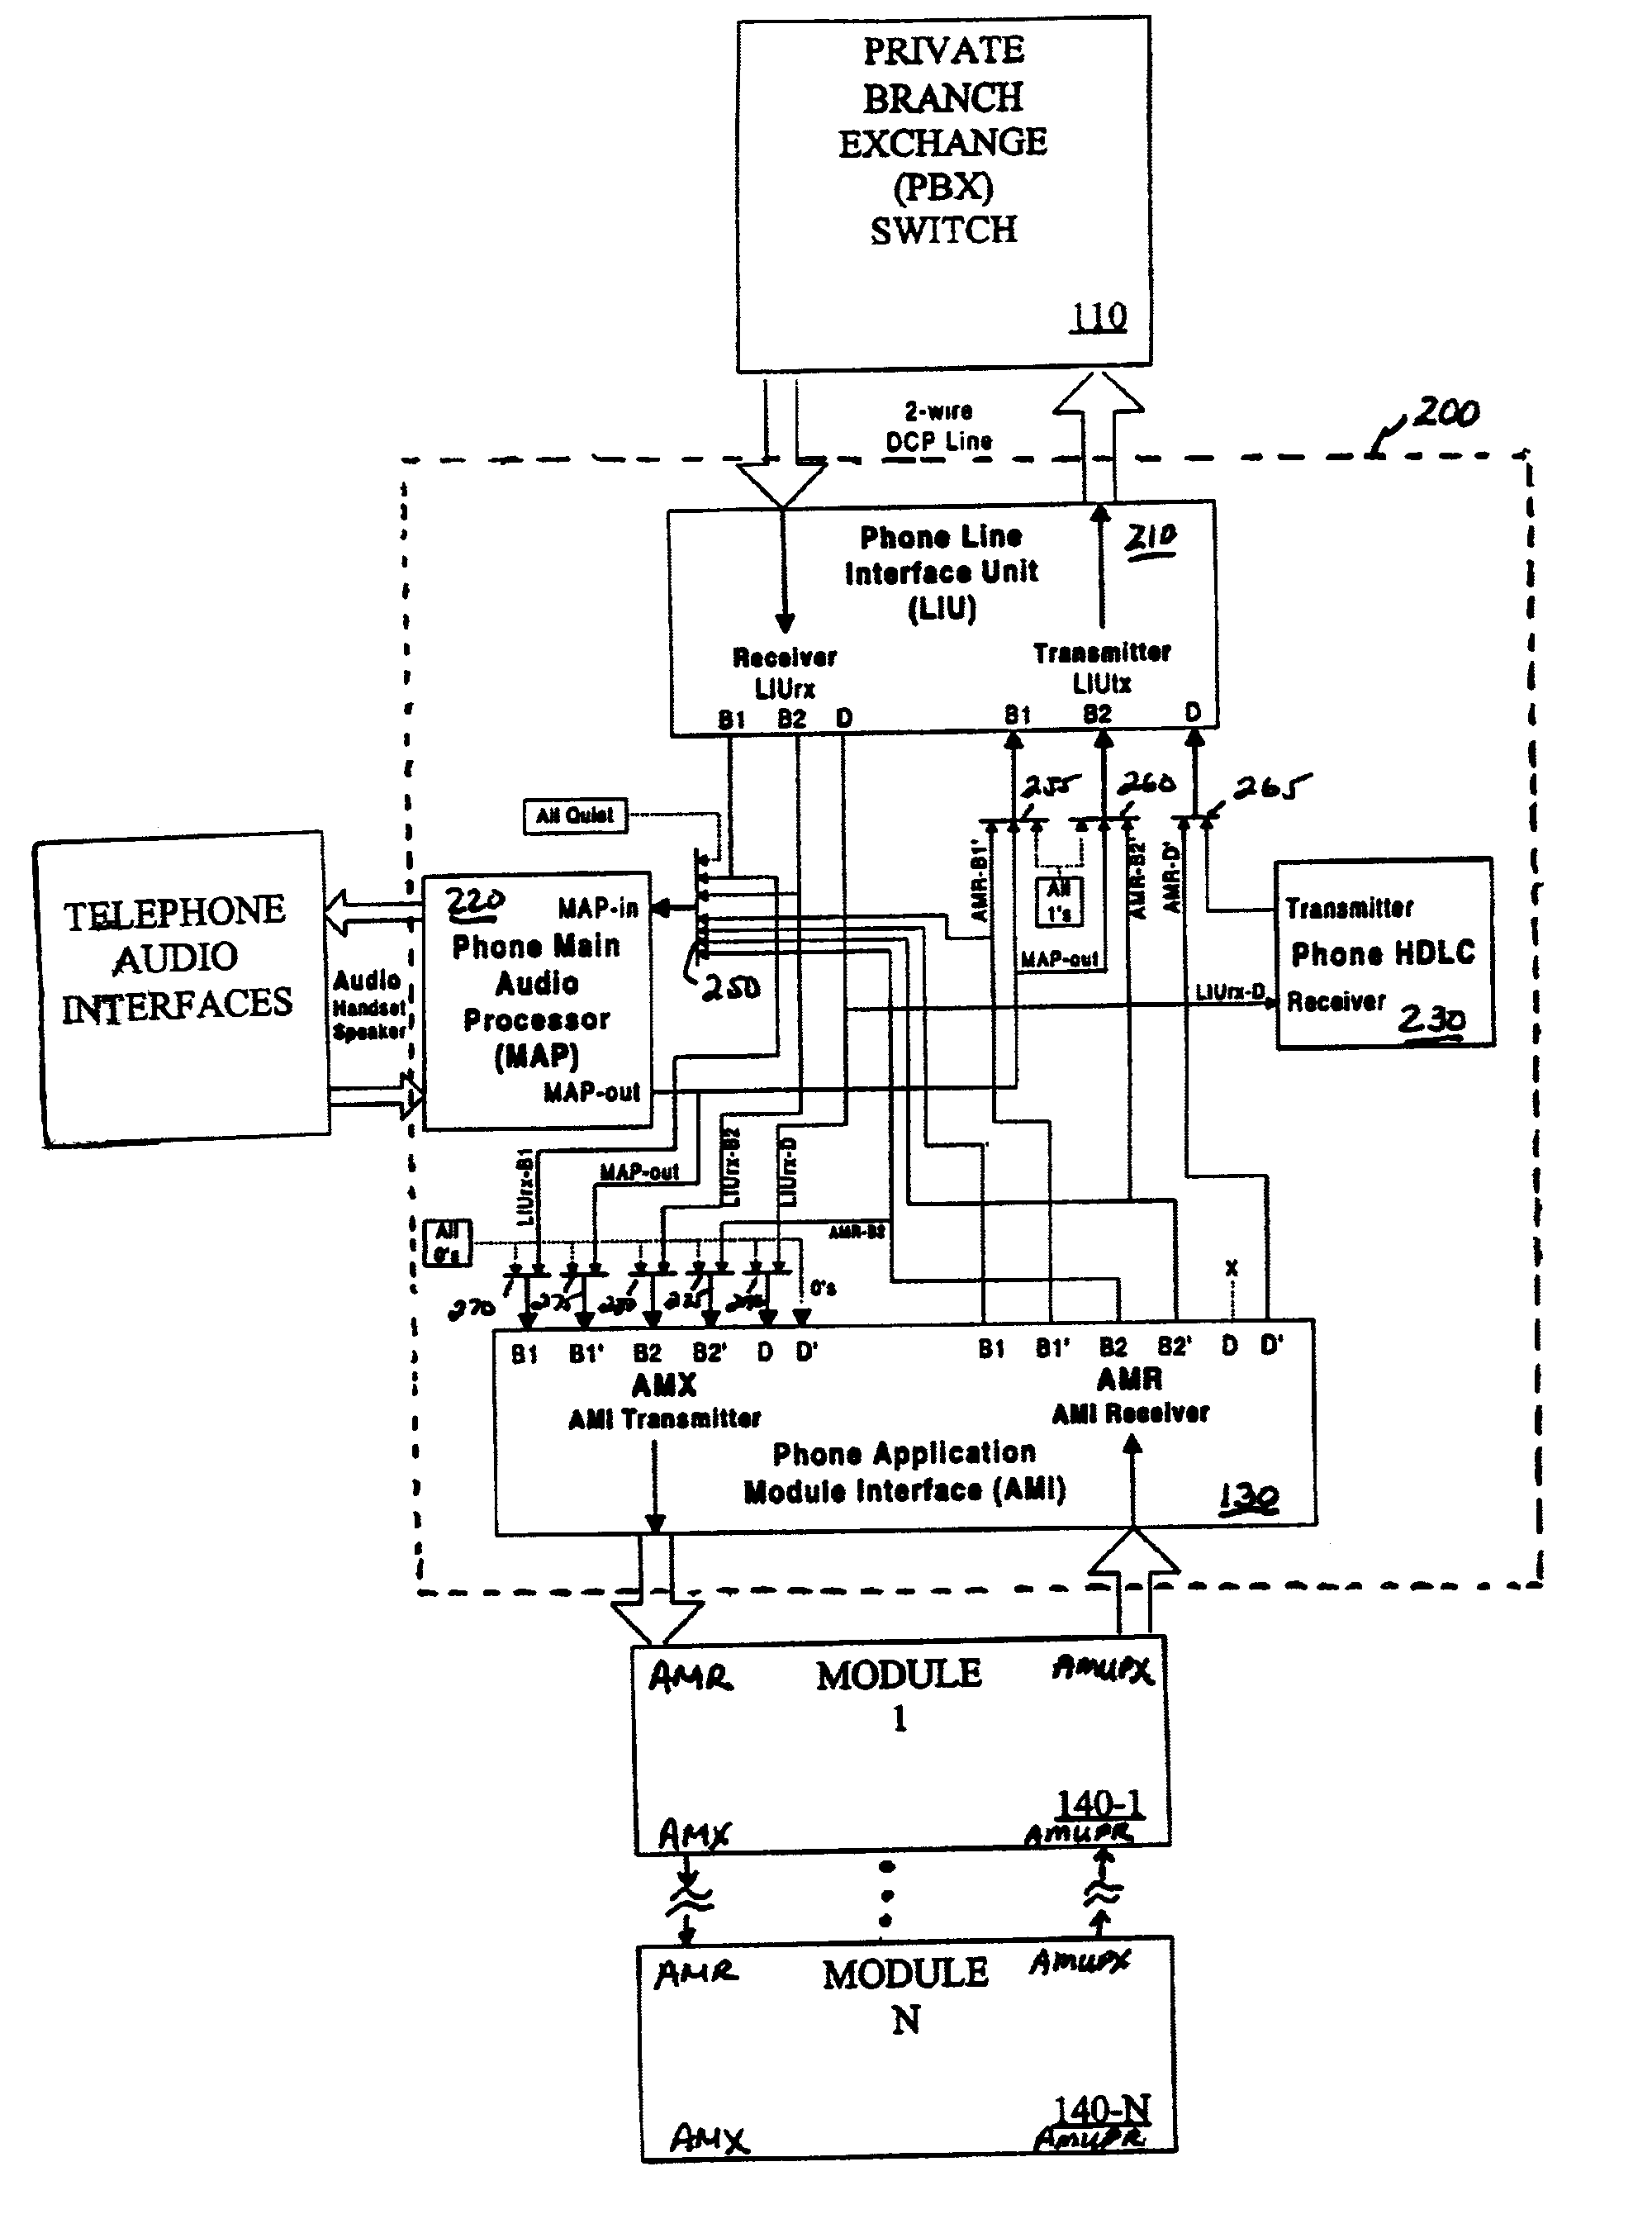 Application module interface for bidirectional signaling and bearer channels in a private branch exchange (PBX) environment